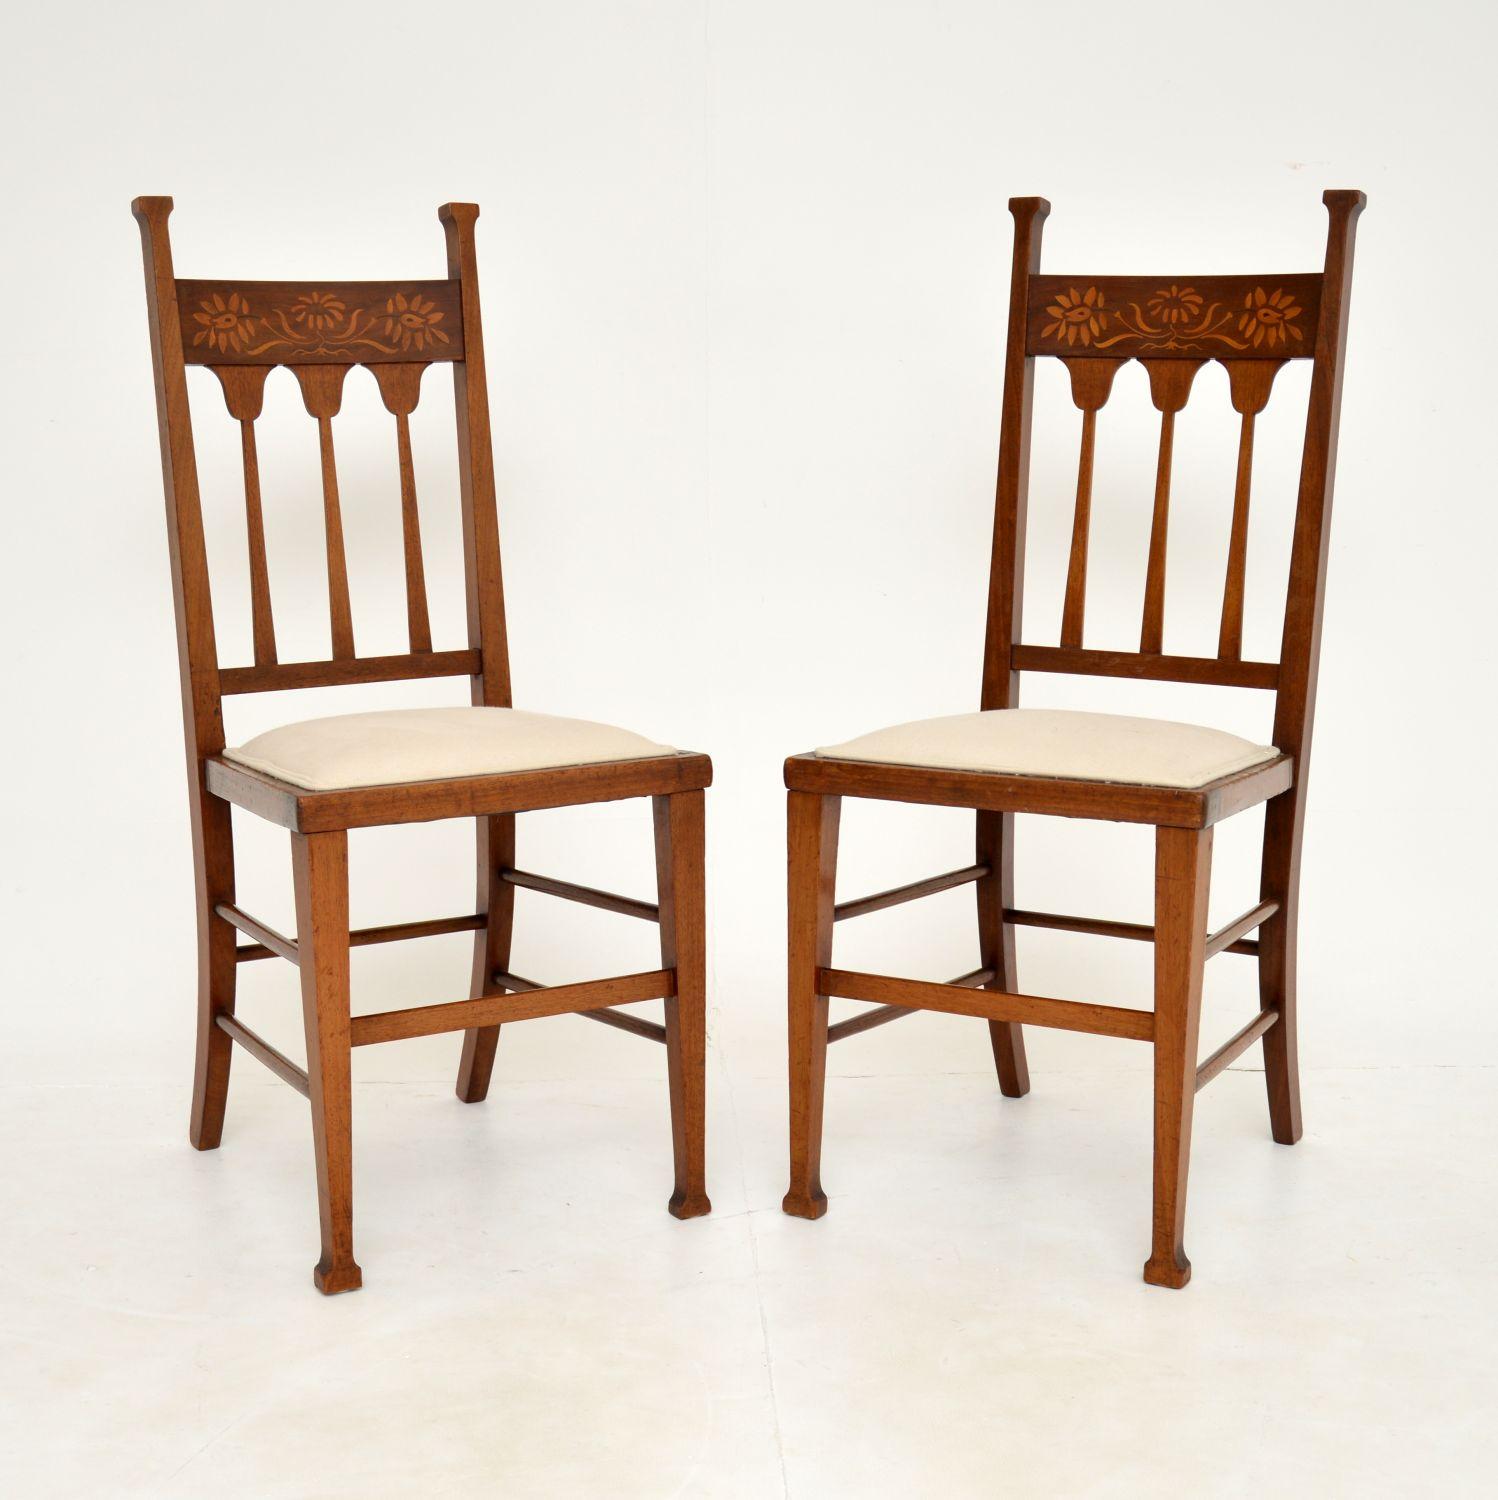 A gorgeous & stylish pair of antique Arts & Crafts period side chairs in solid wood. These were made in England, they date from around 1890-1900 period.

The quality is excellent, these are beautifully crafted and have stunning floral inlaid